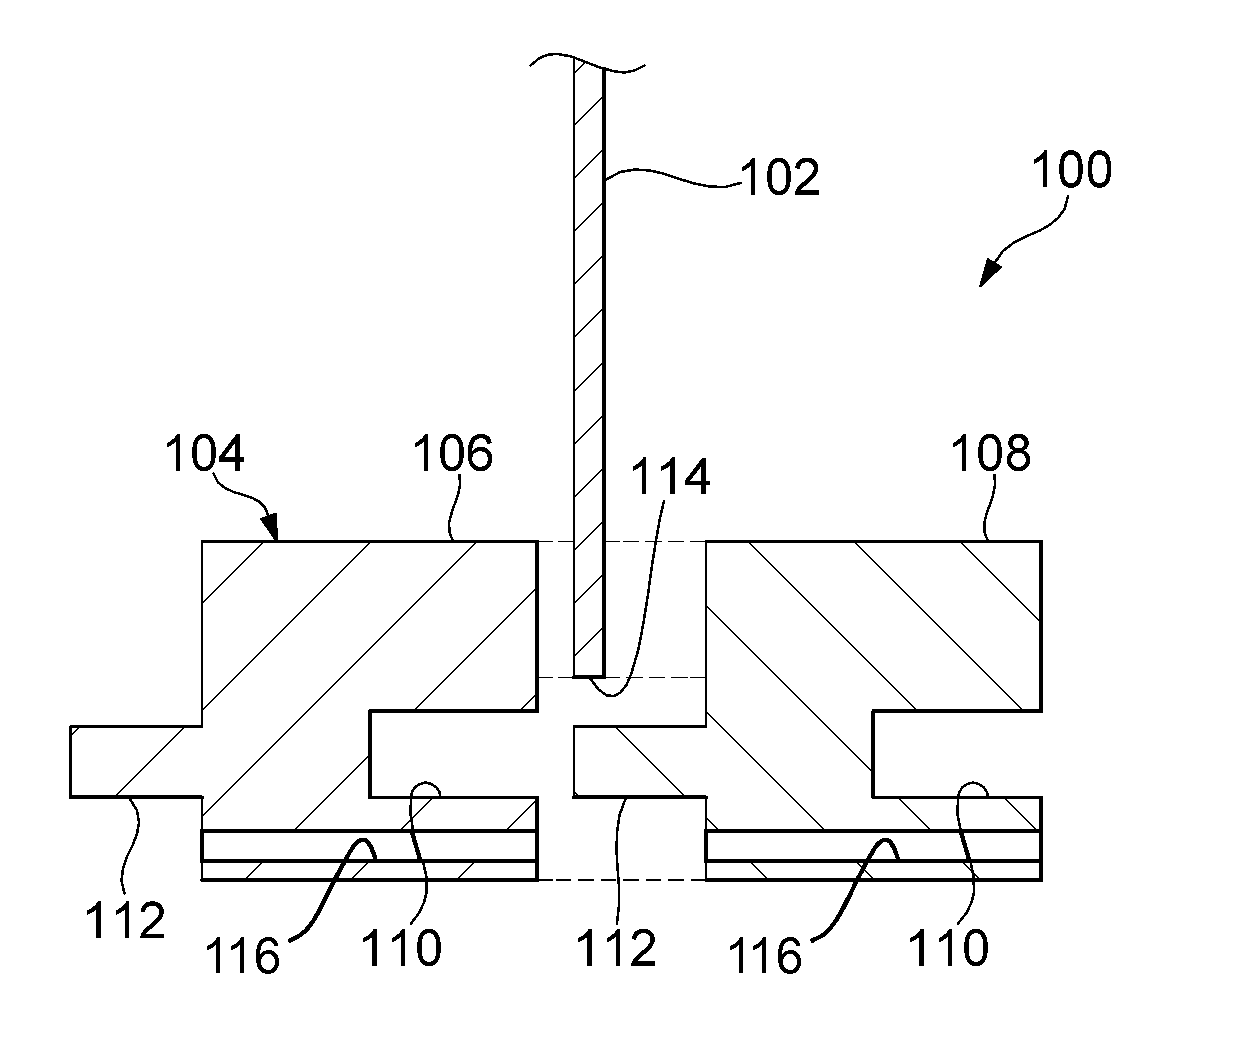 Battery cooling module foot profile design for a jointless conductive FIN/foot compressed interface connection